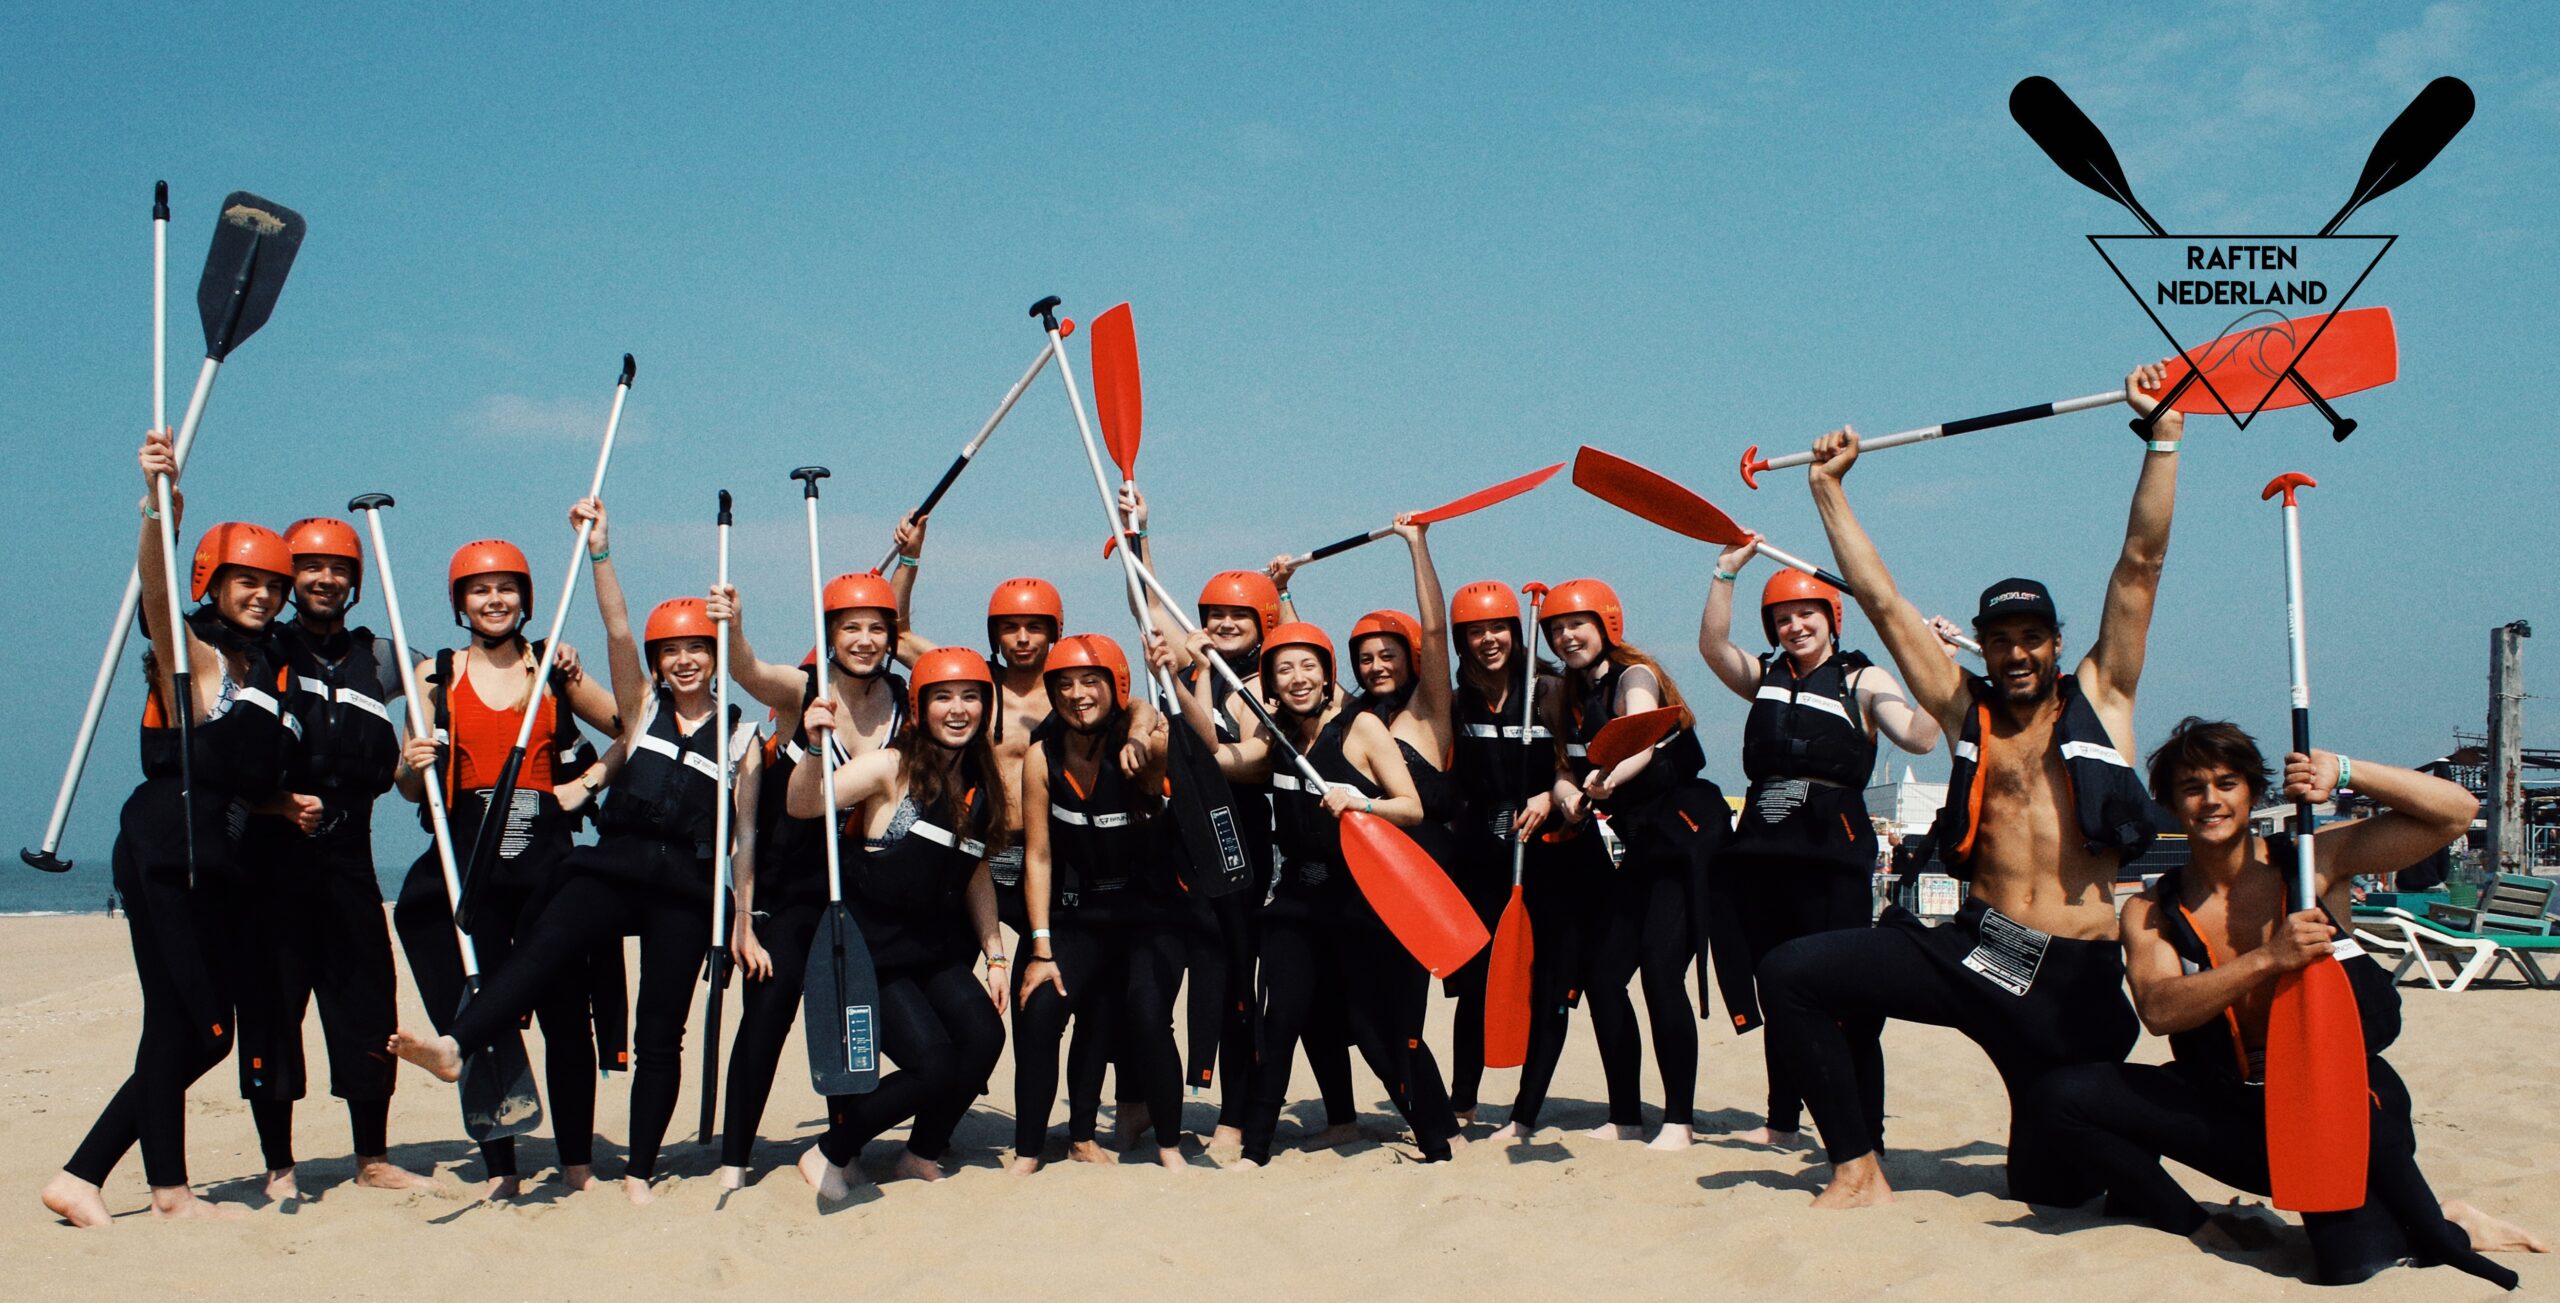 Spectacular Company outing - Surf rafting